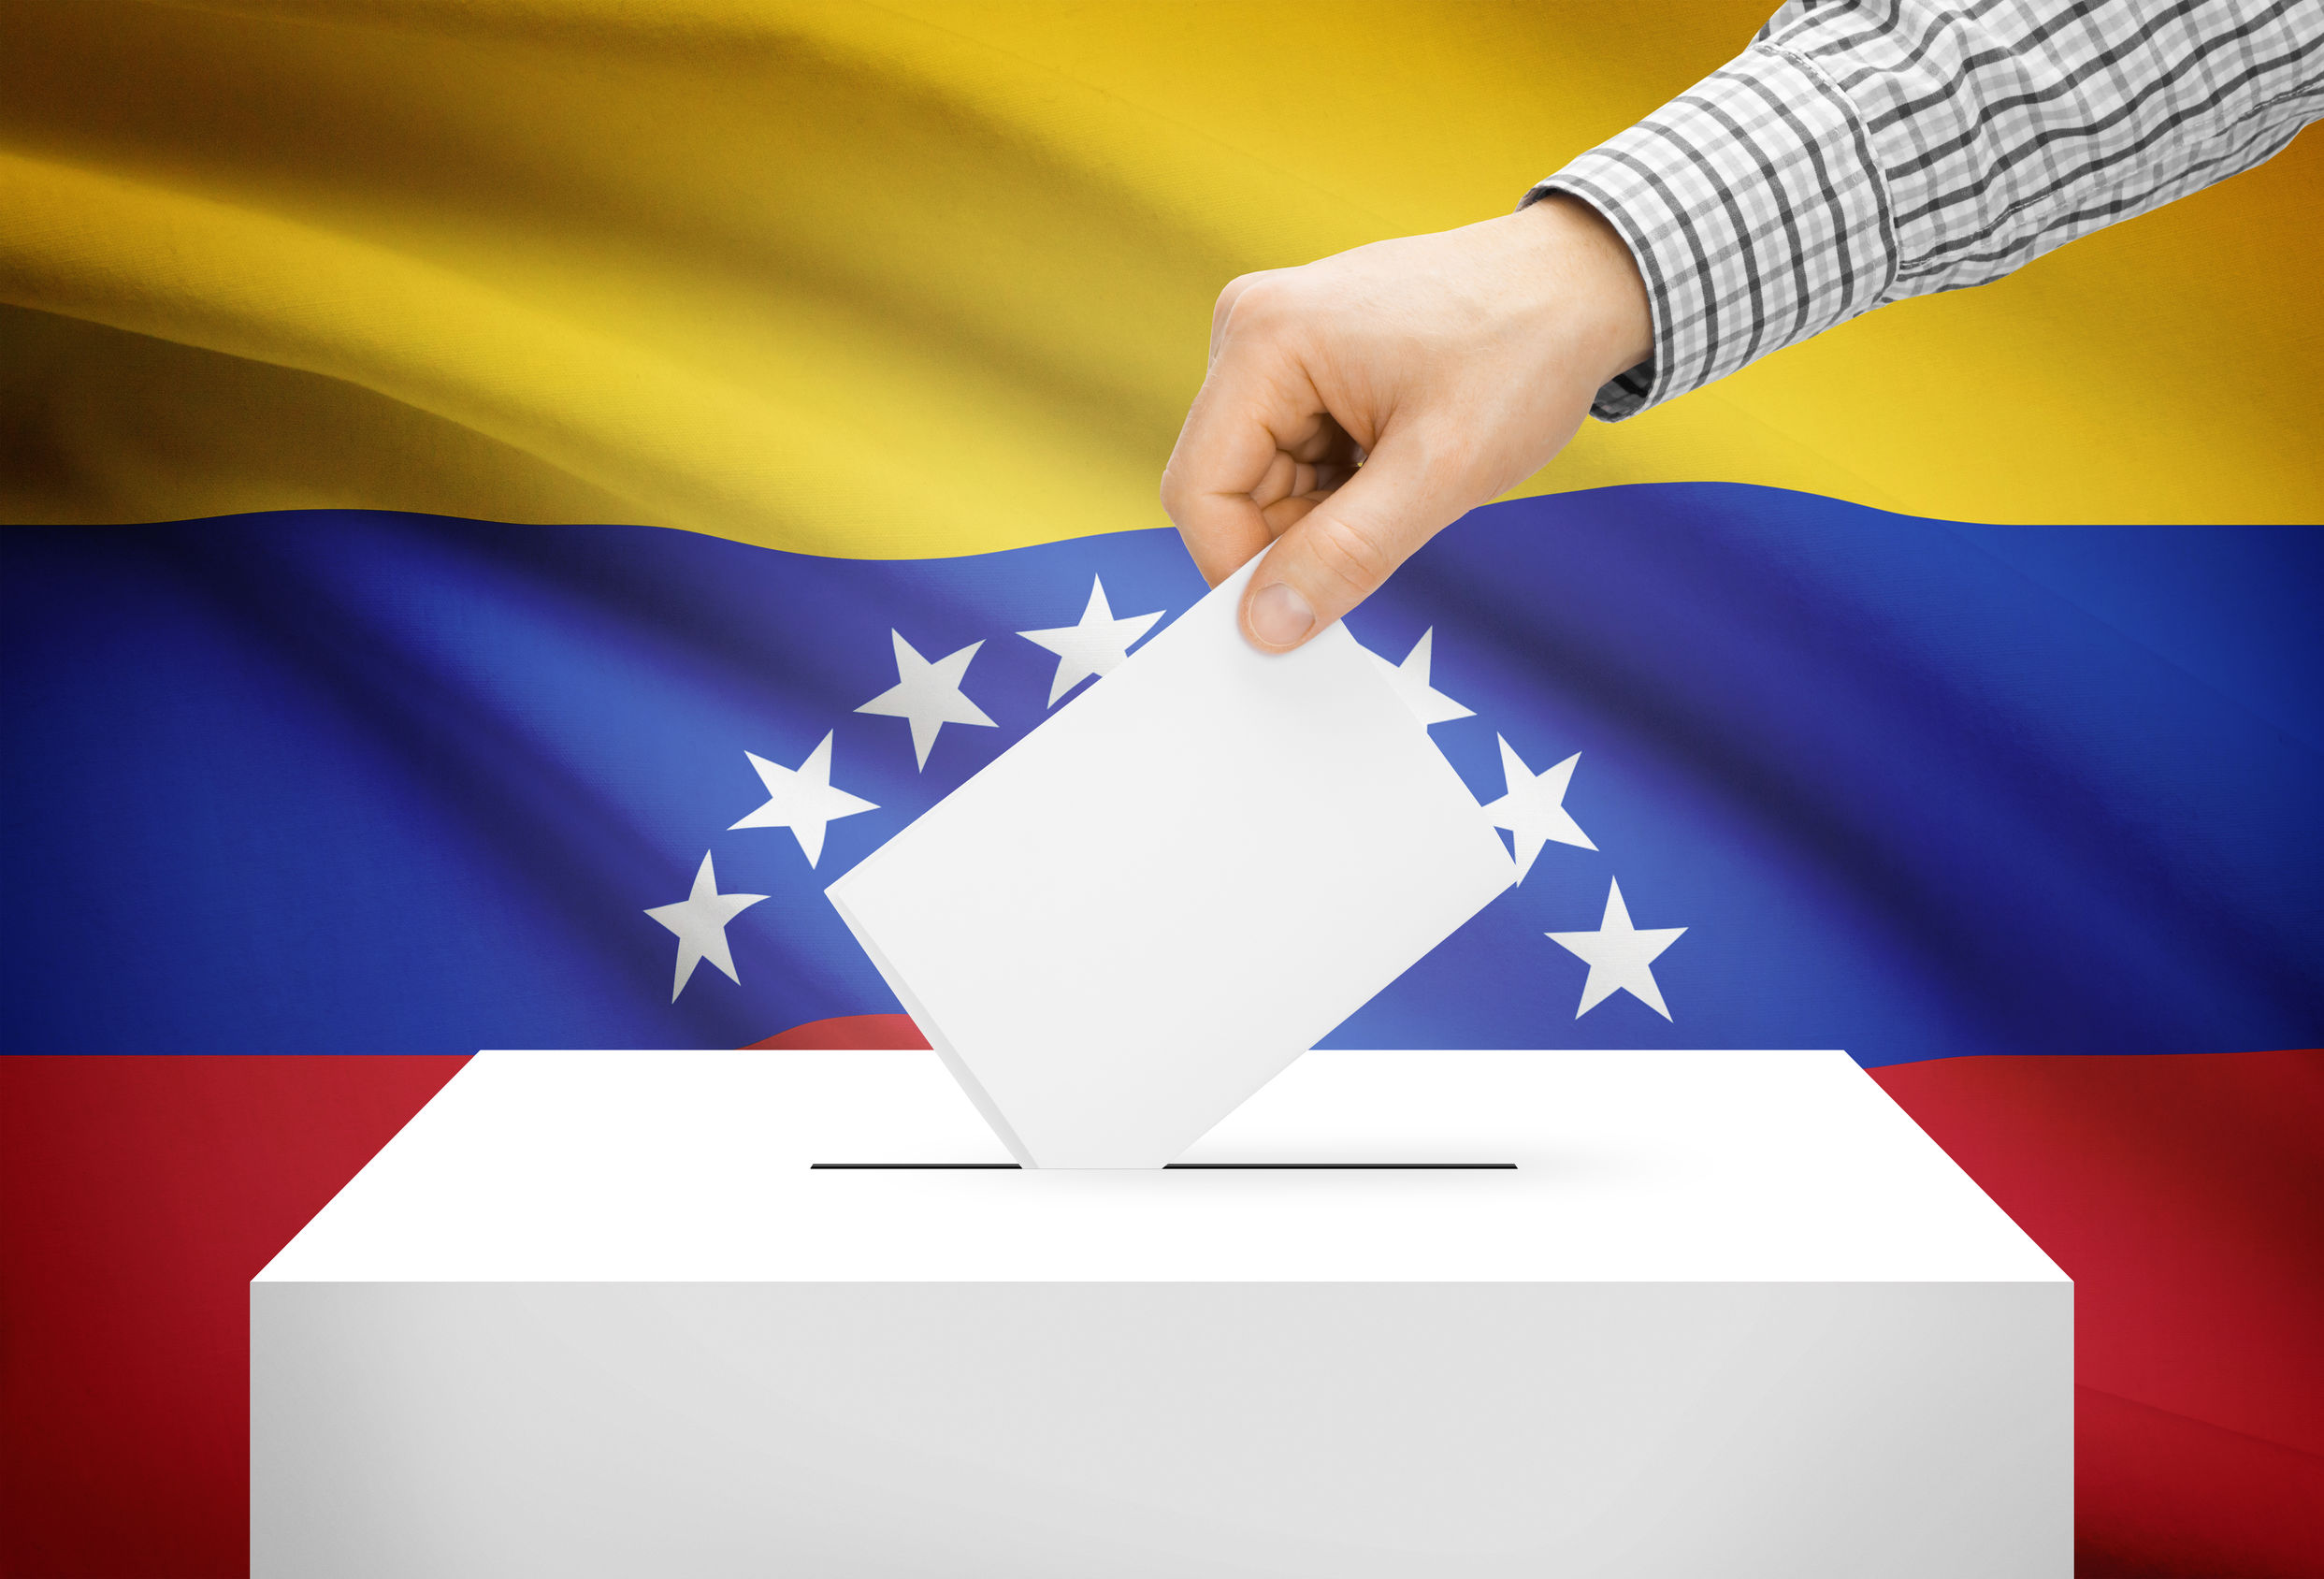 Voting concept Ballot box with national flag on background Venezuela